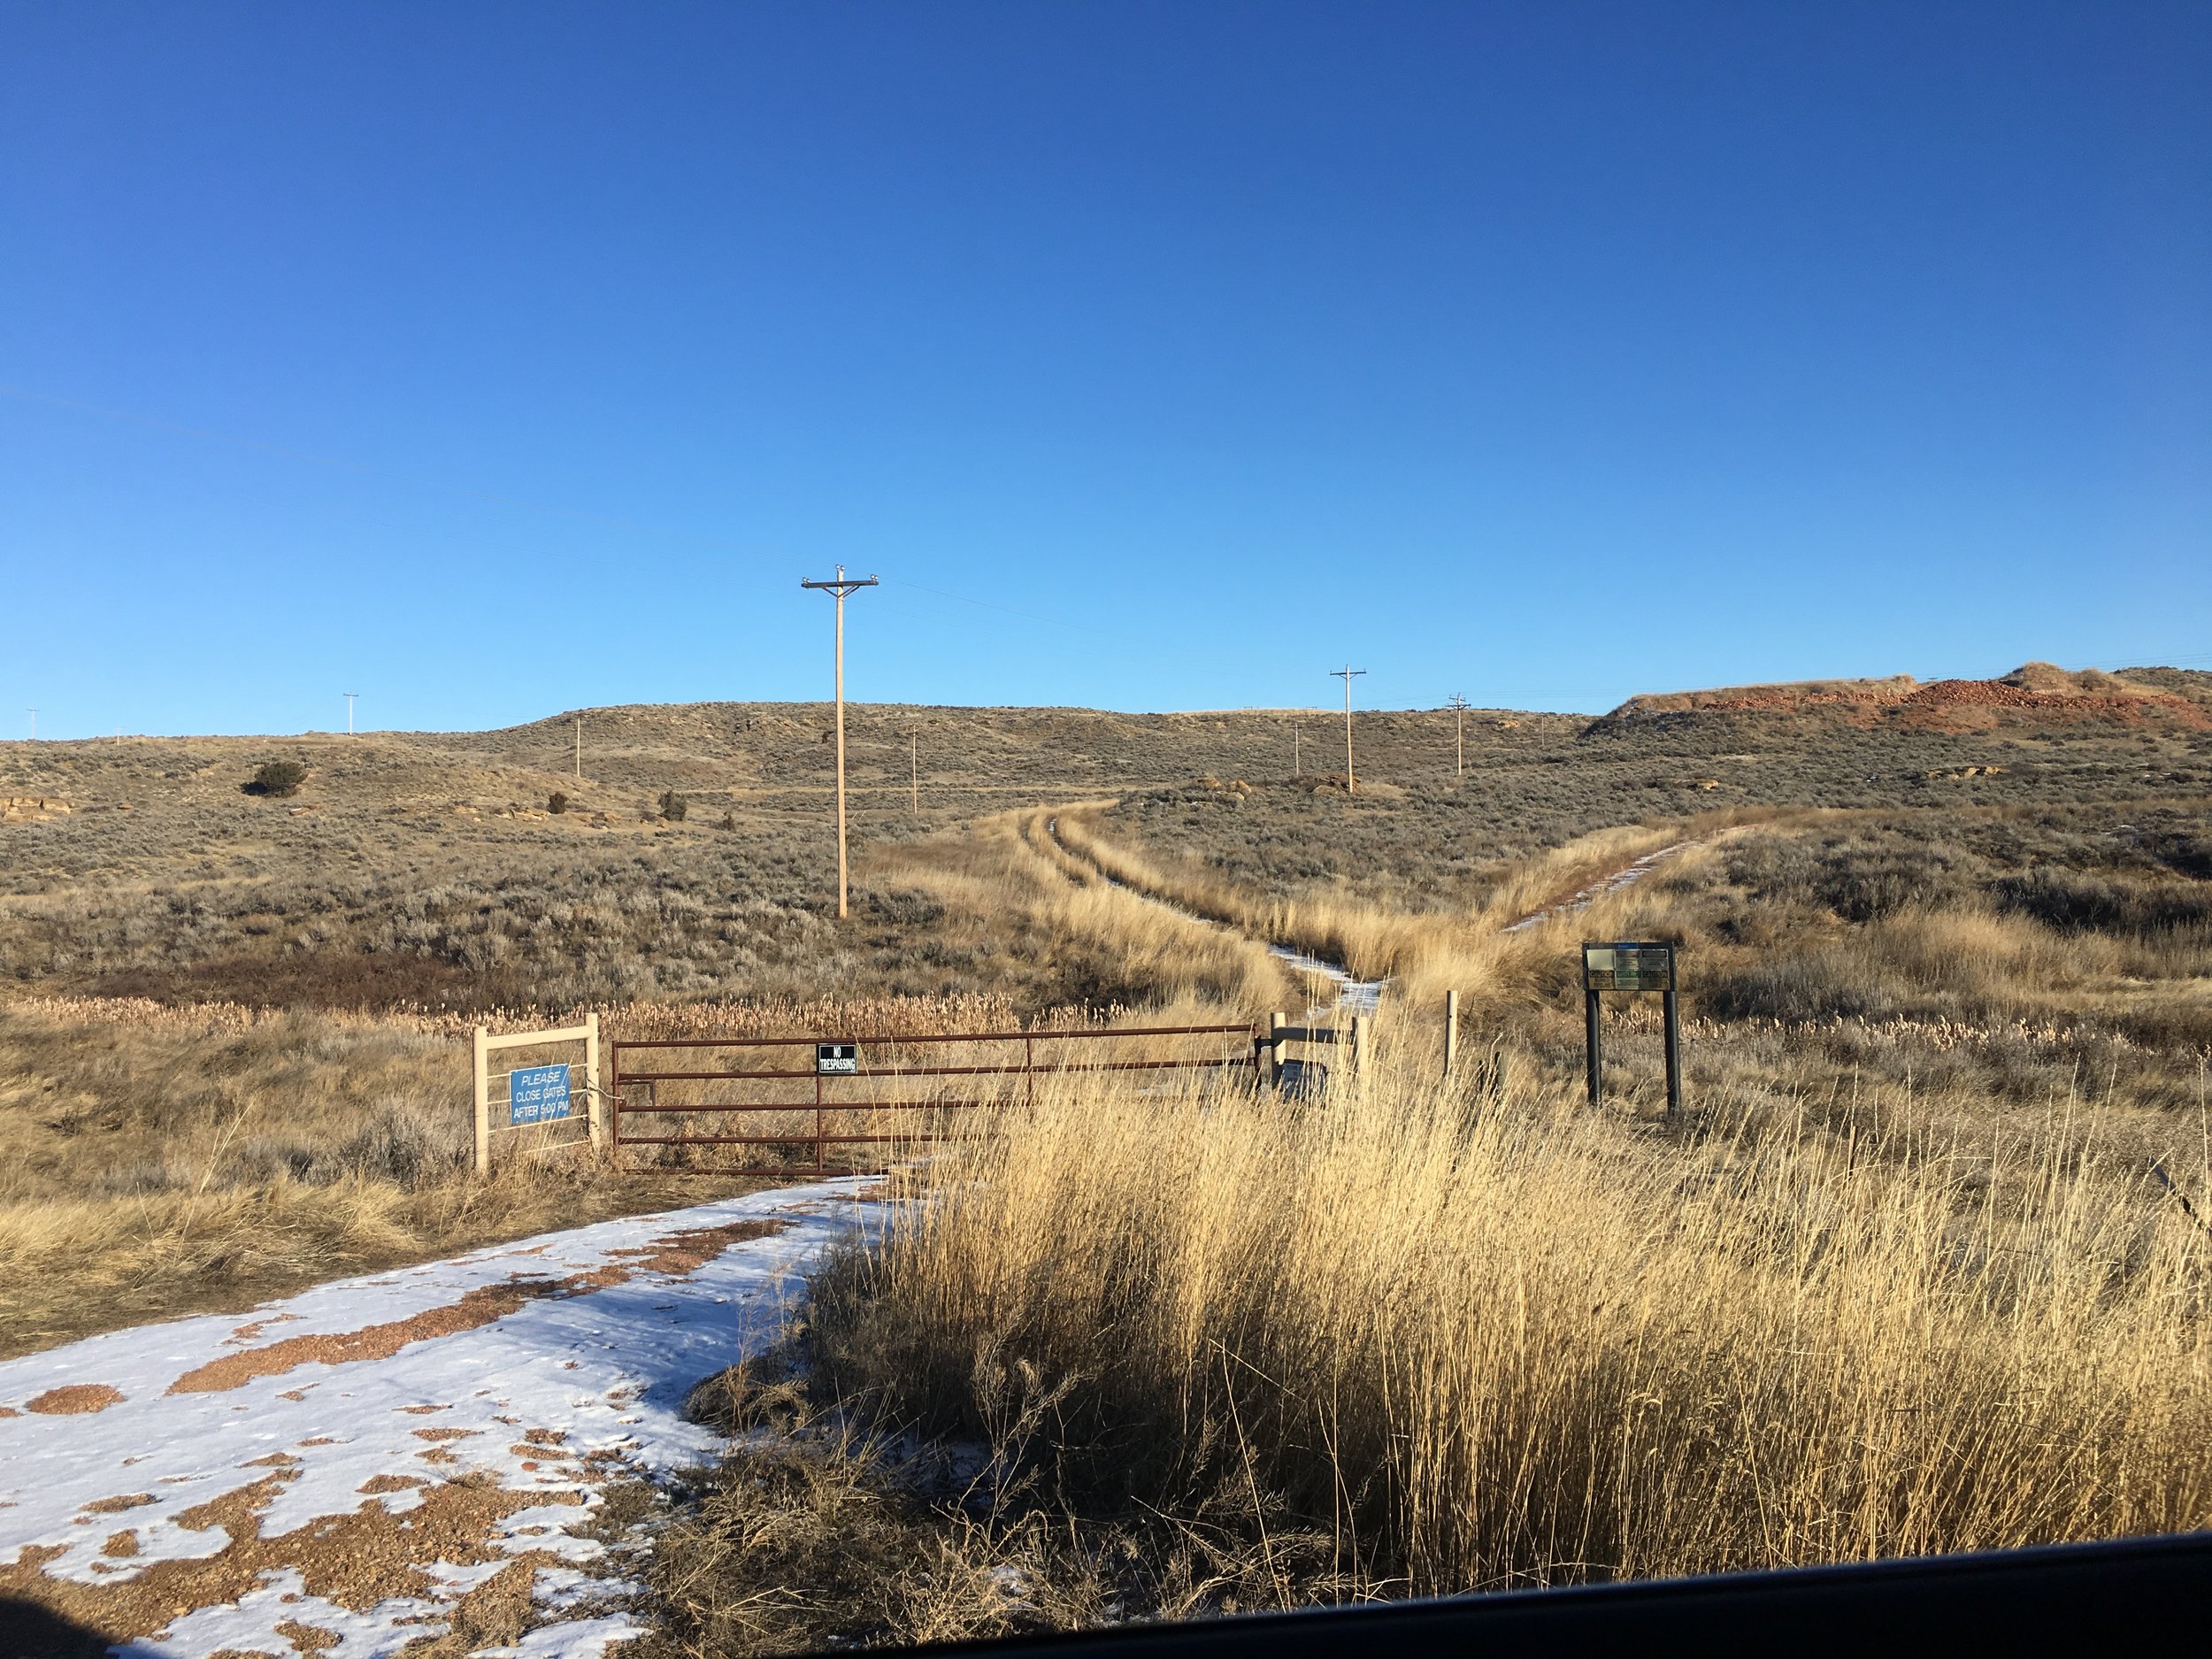 Coalbed methane access roads and above ground power infrastructure, Sheridan County, WY